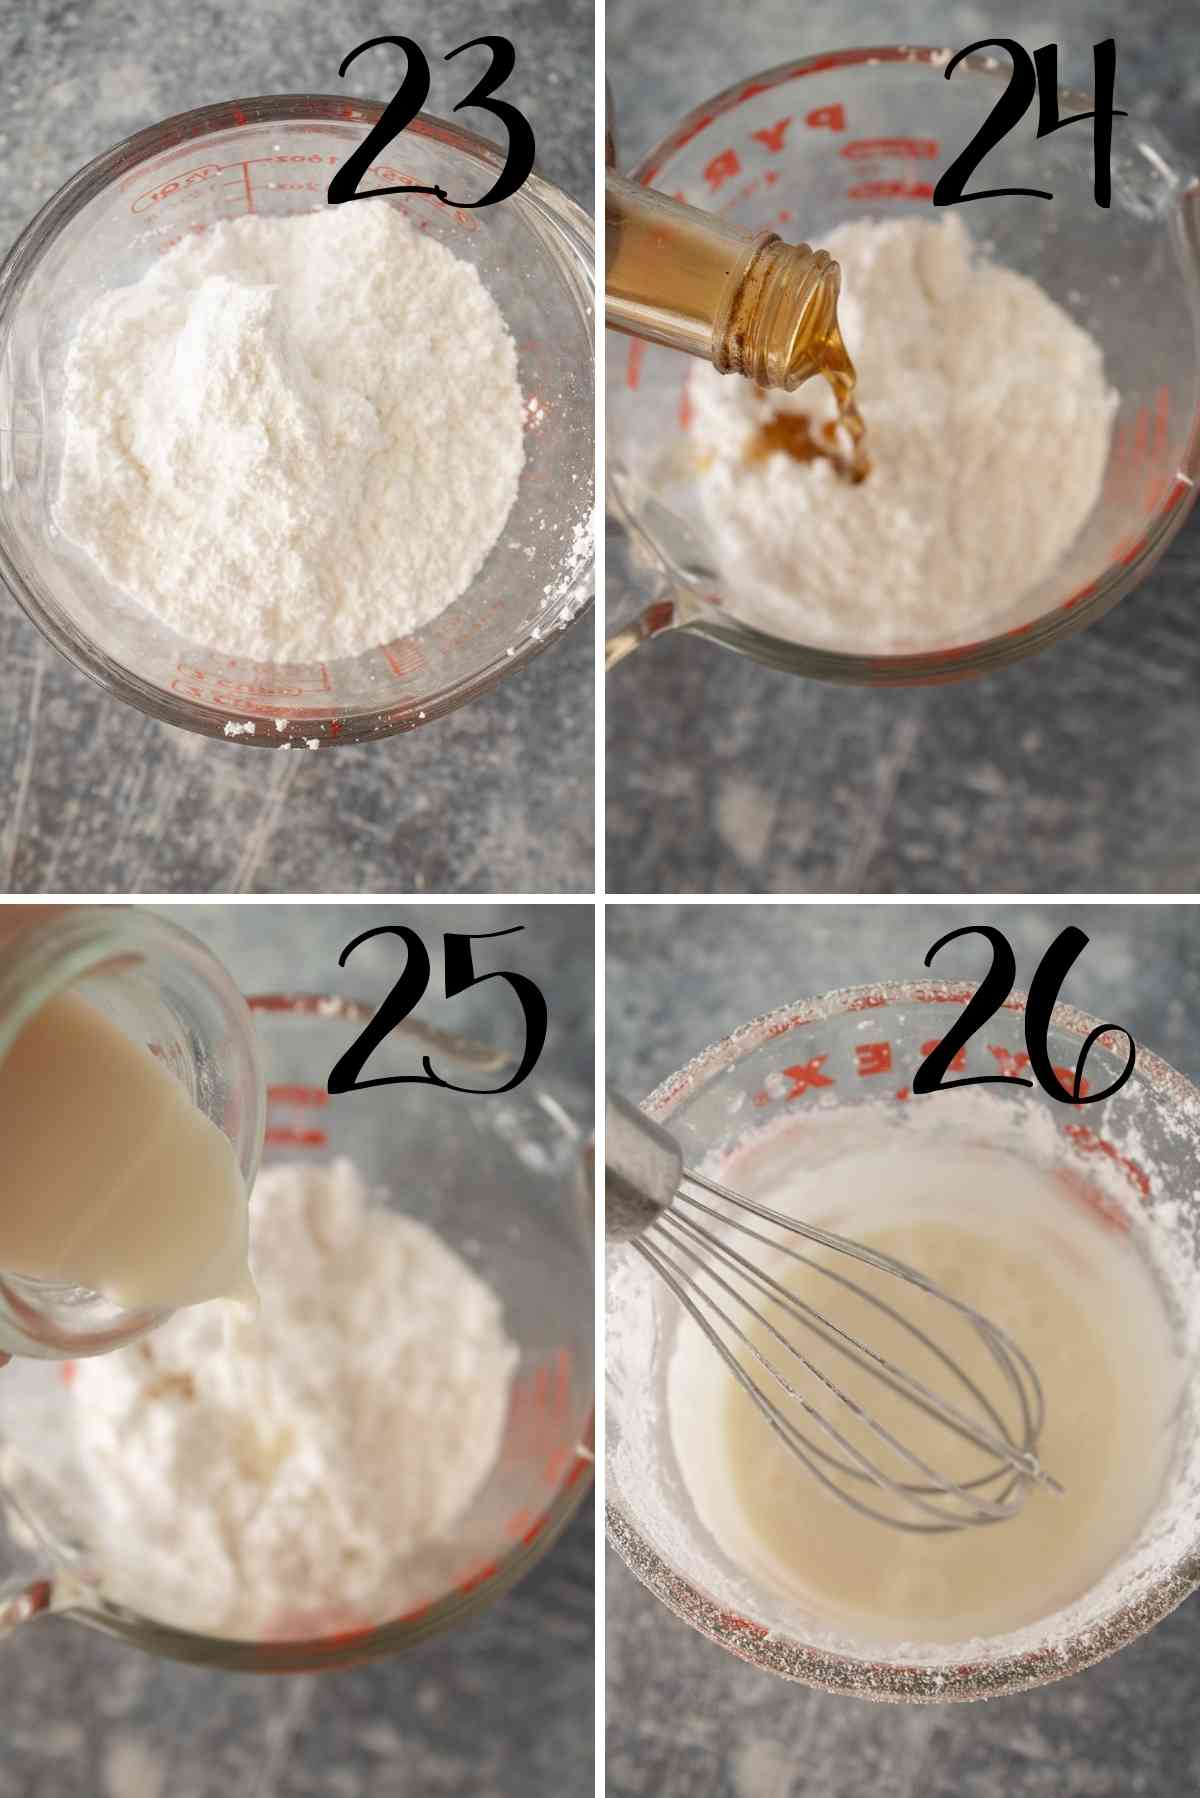 Mix up the icing in a small bowl.